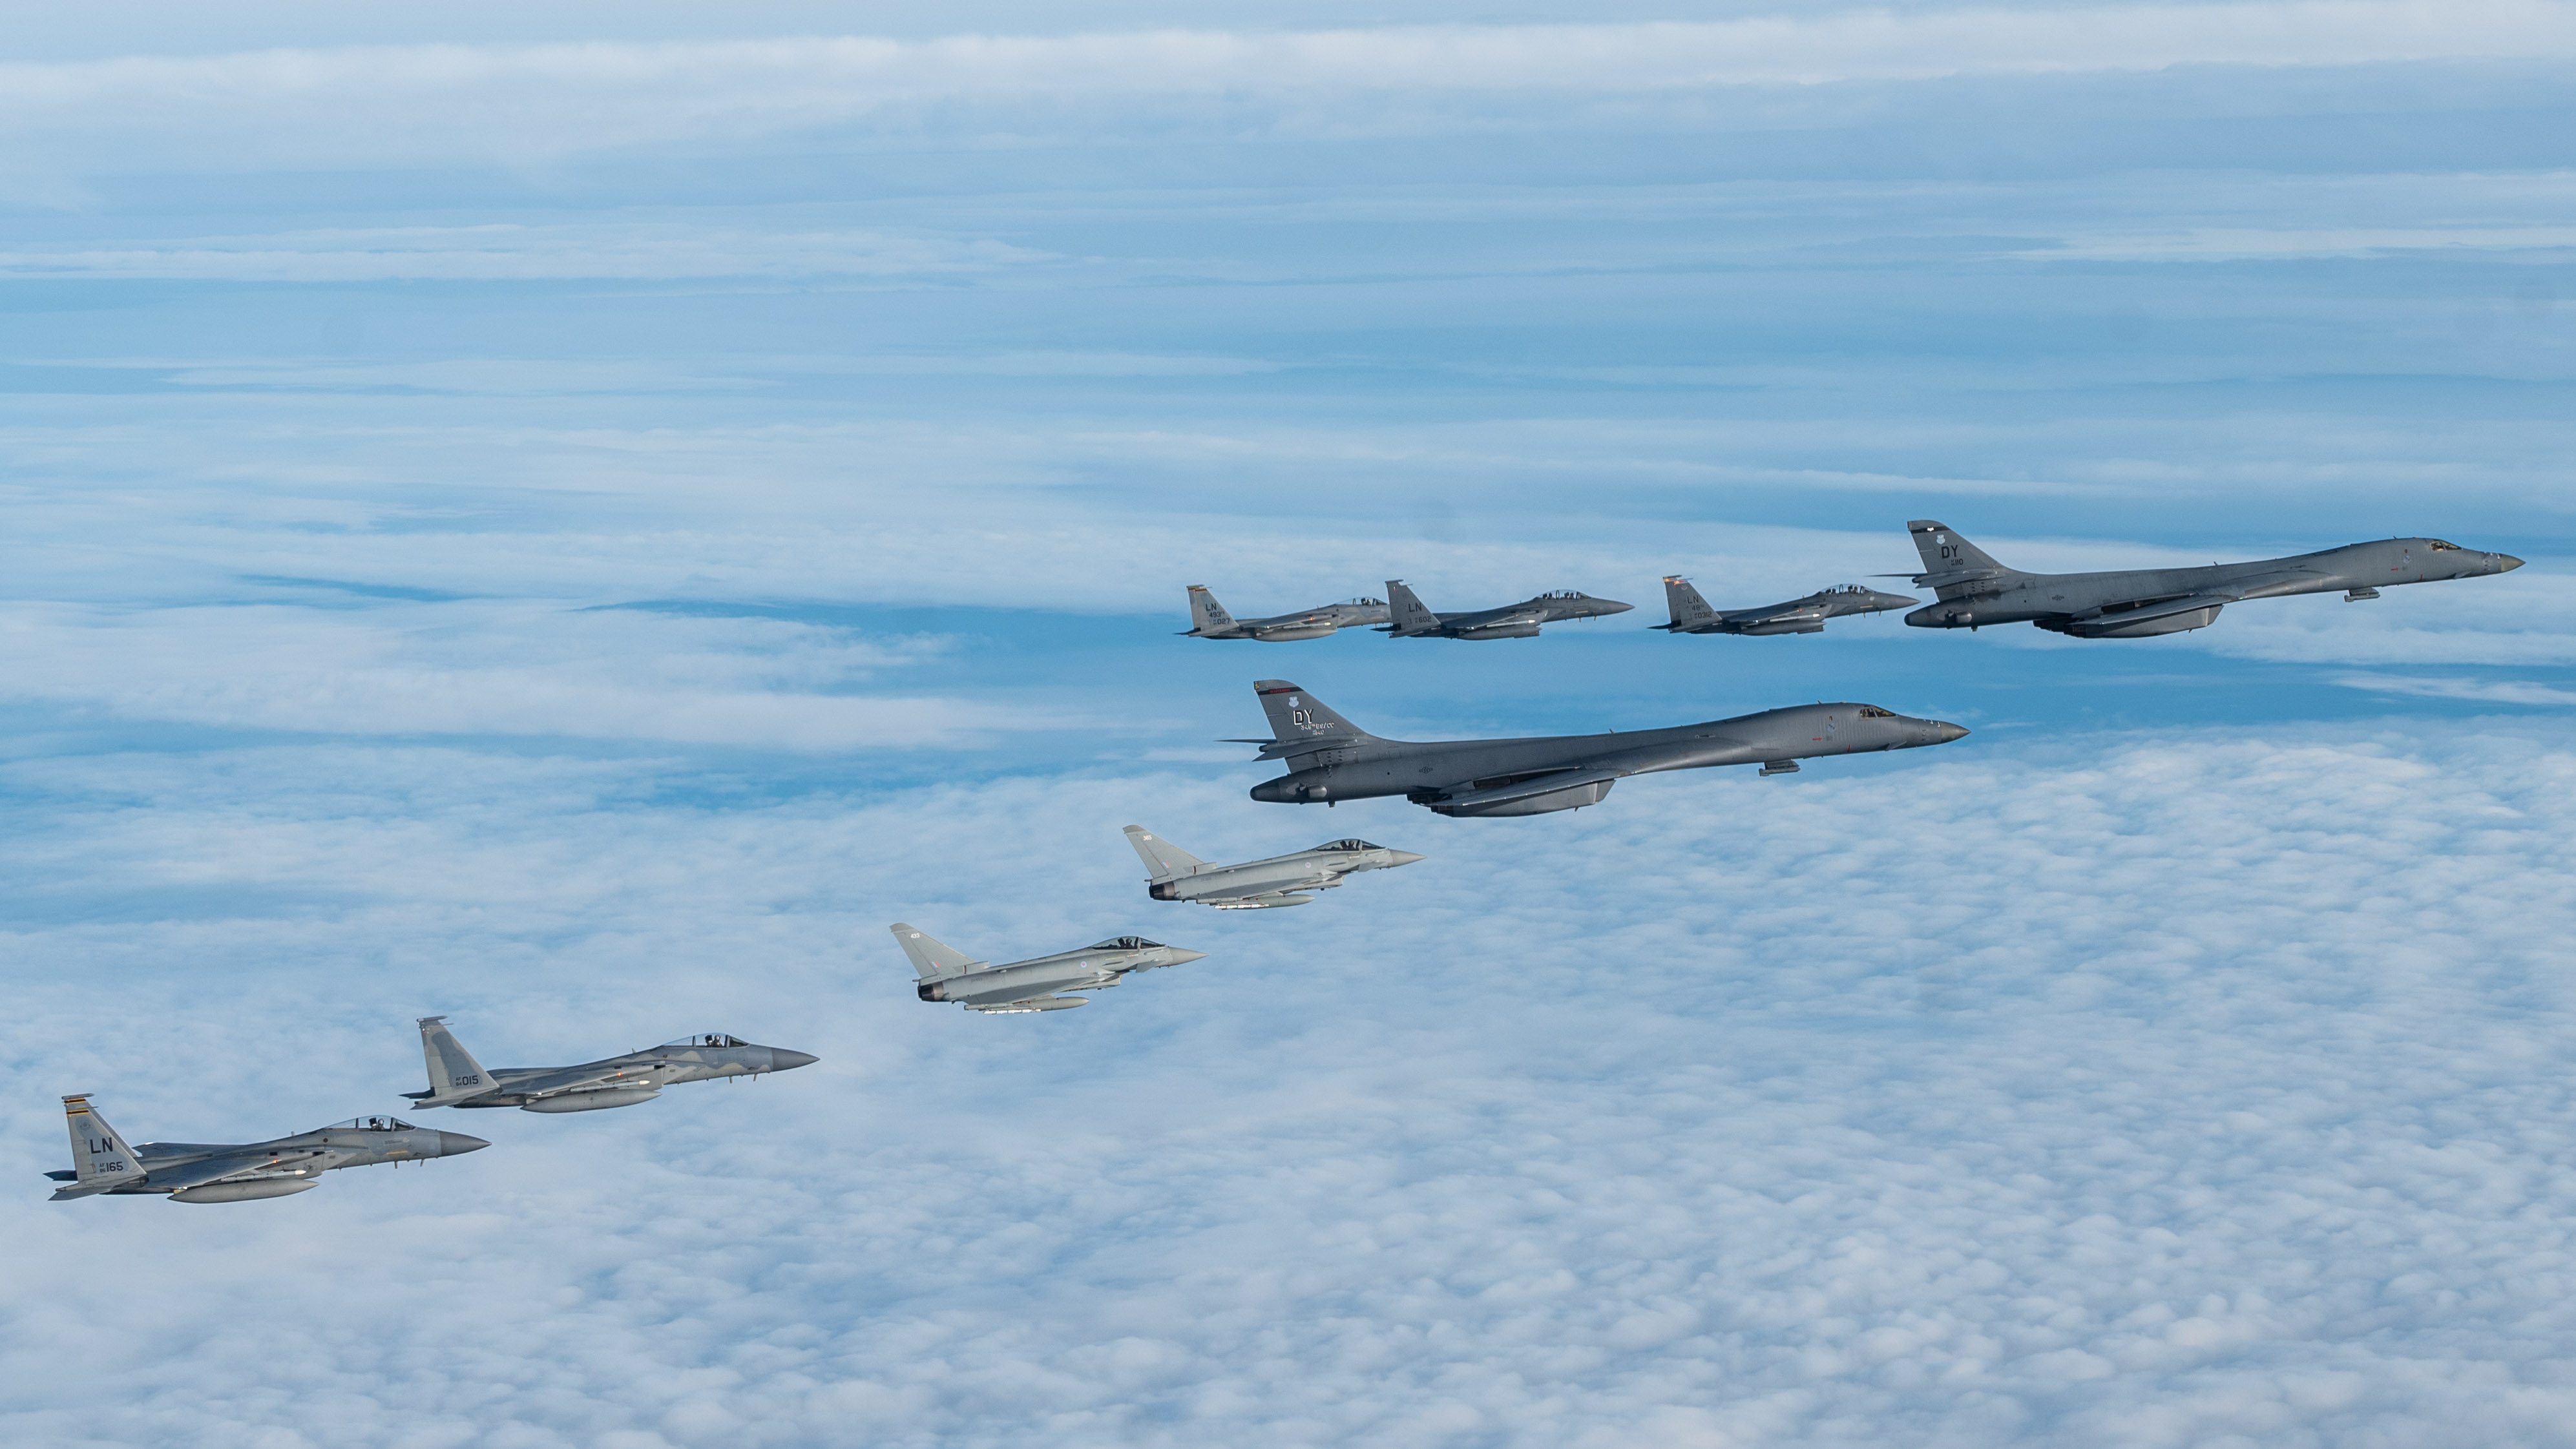 The RAF Conduct Mass Air Exercise with U.S.A.F to Conclude the Bomber Task Force Season